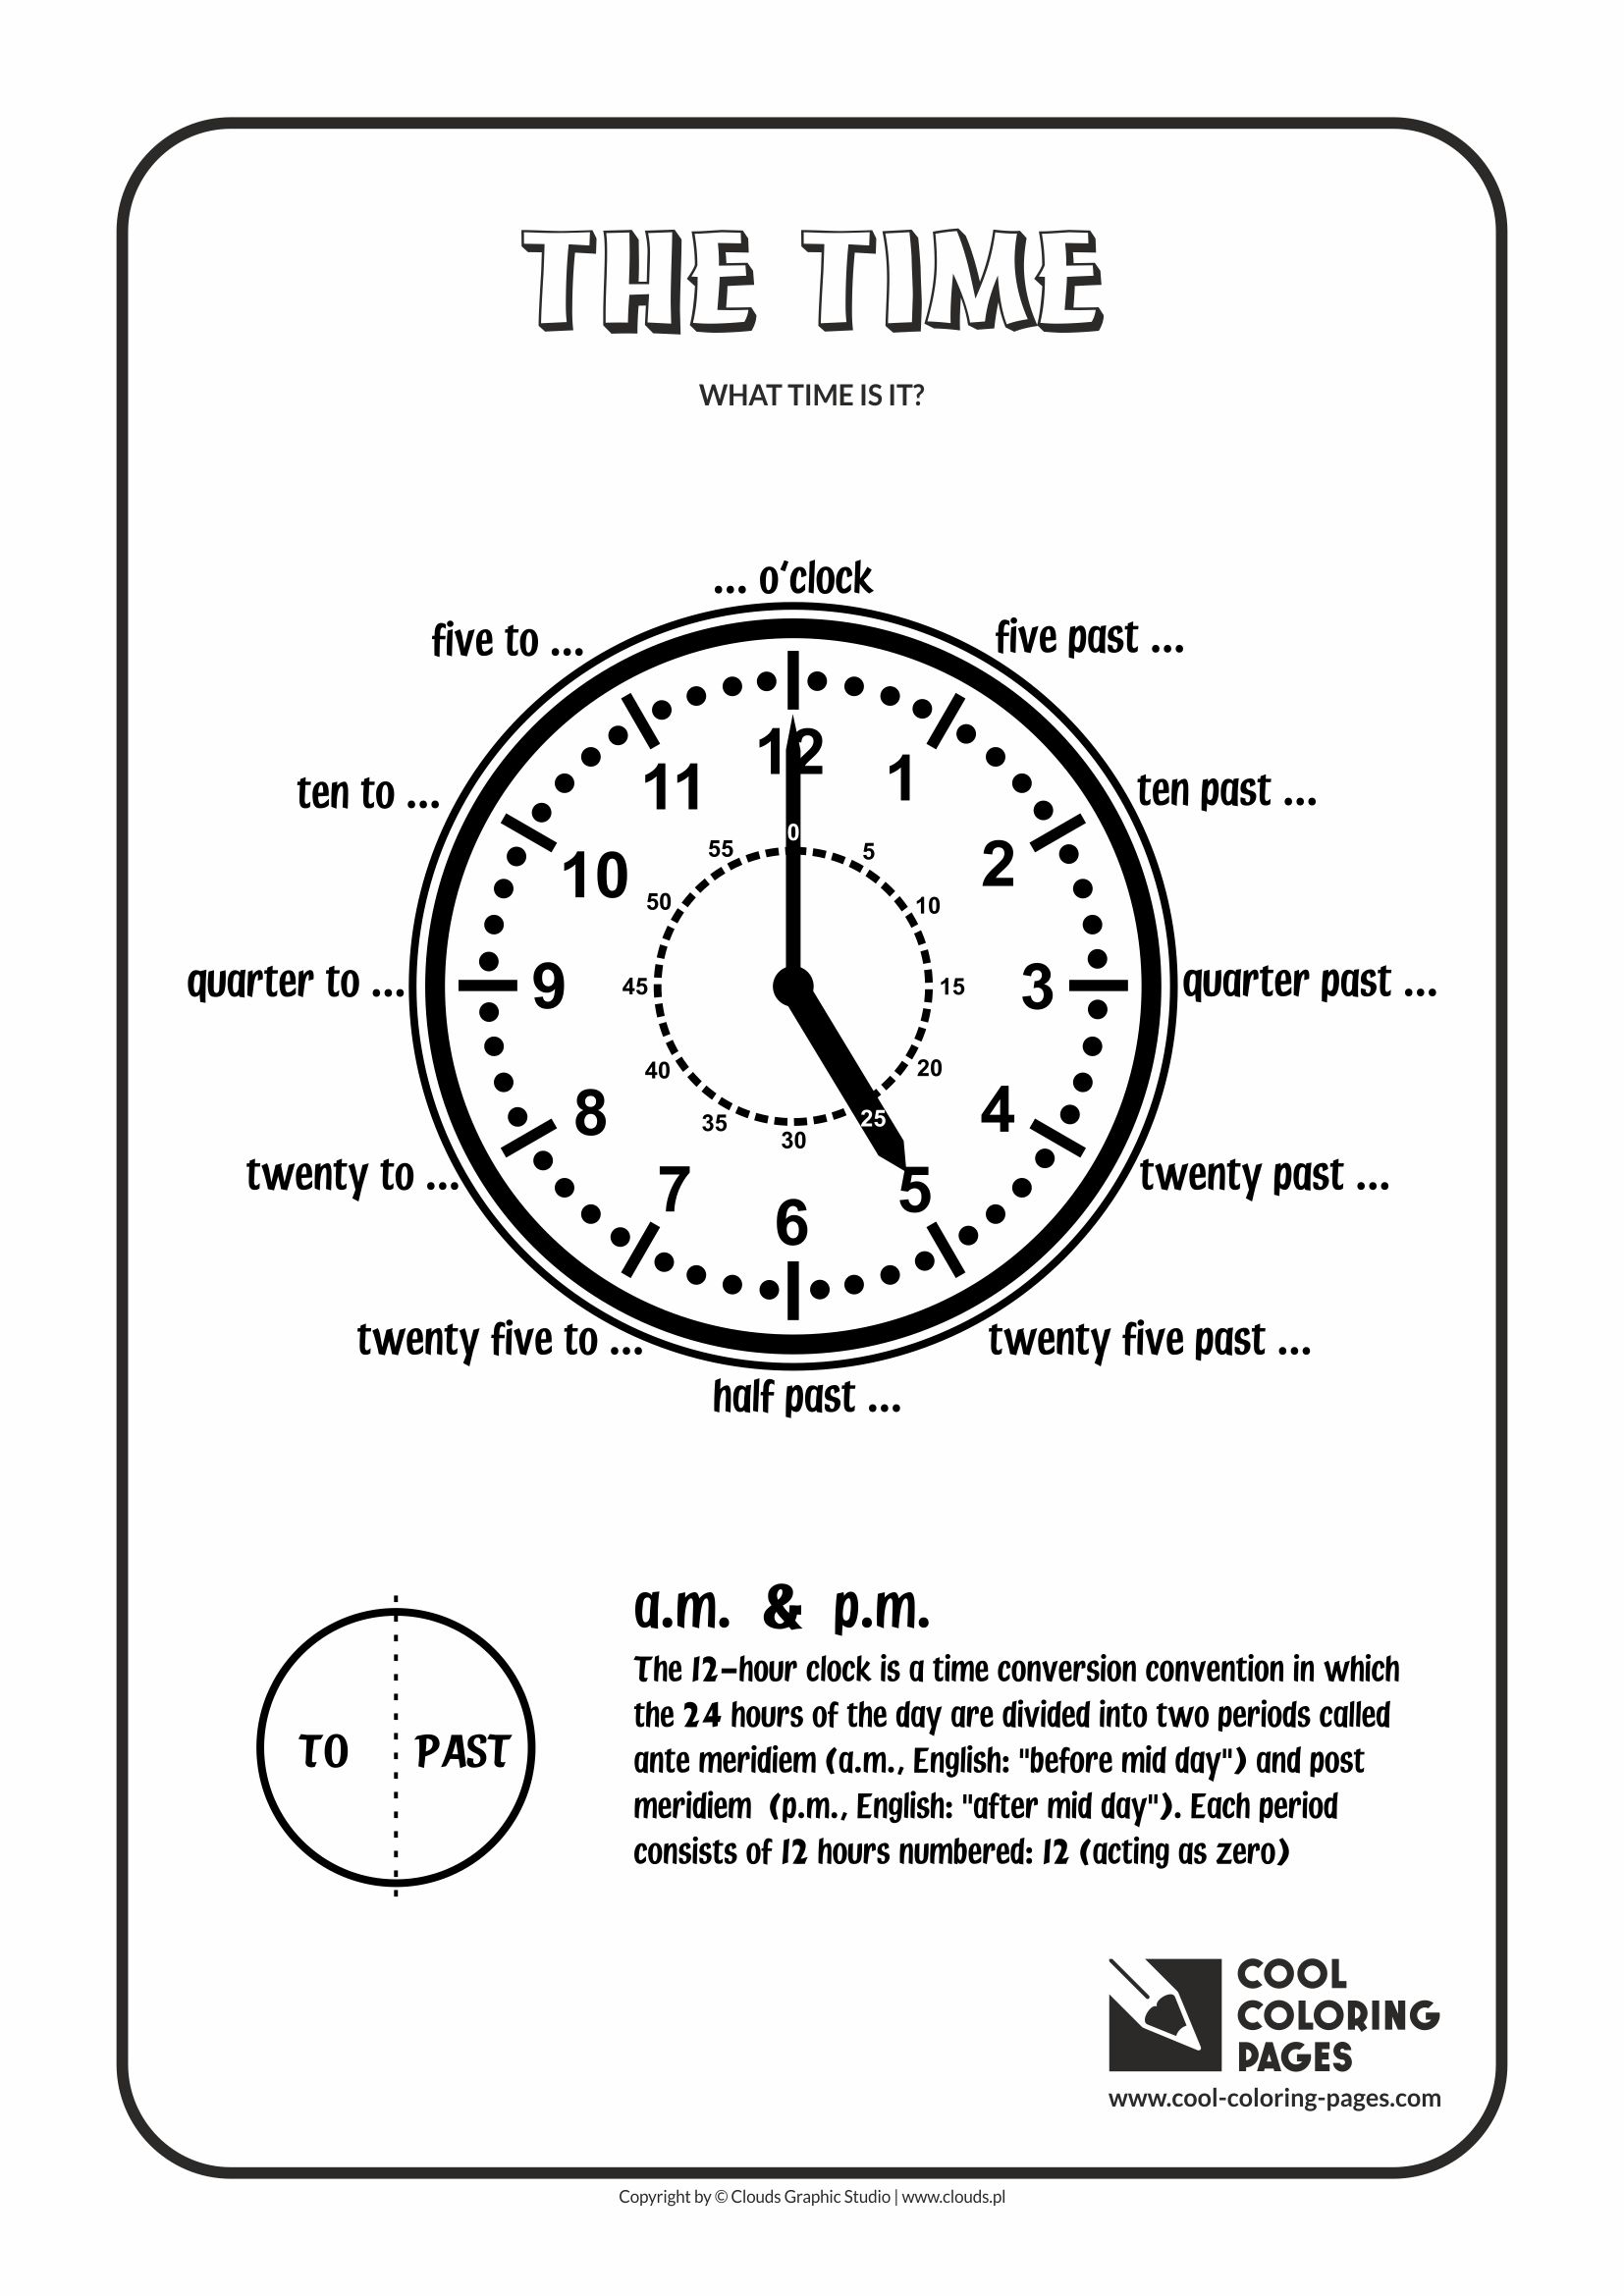 Cool Coloring Pages - Time / The time